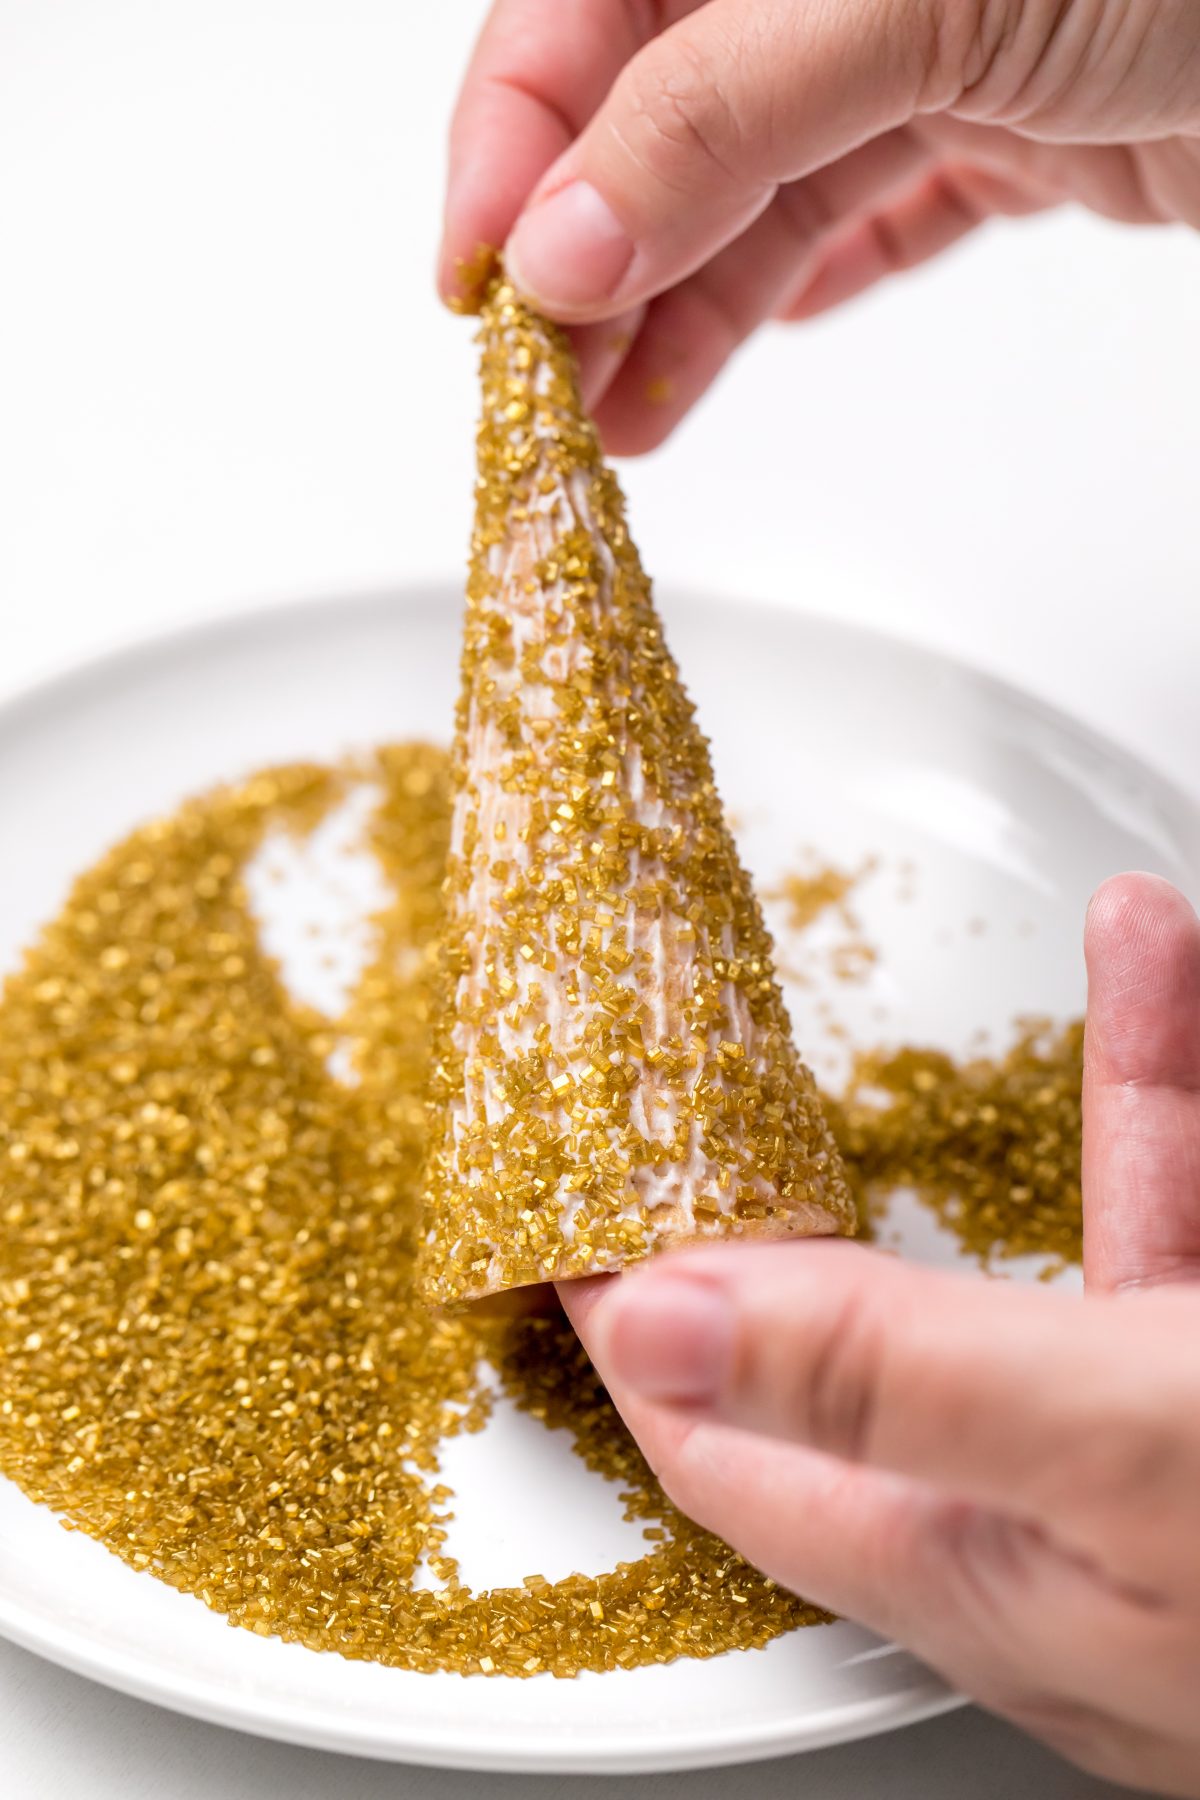 Make sure entire cone is covered thoroughly with sparkly sugar